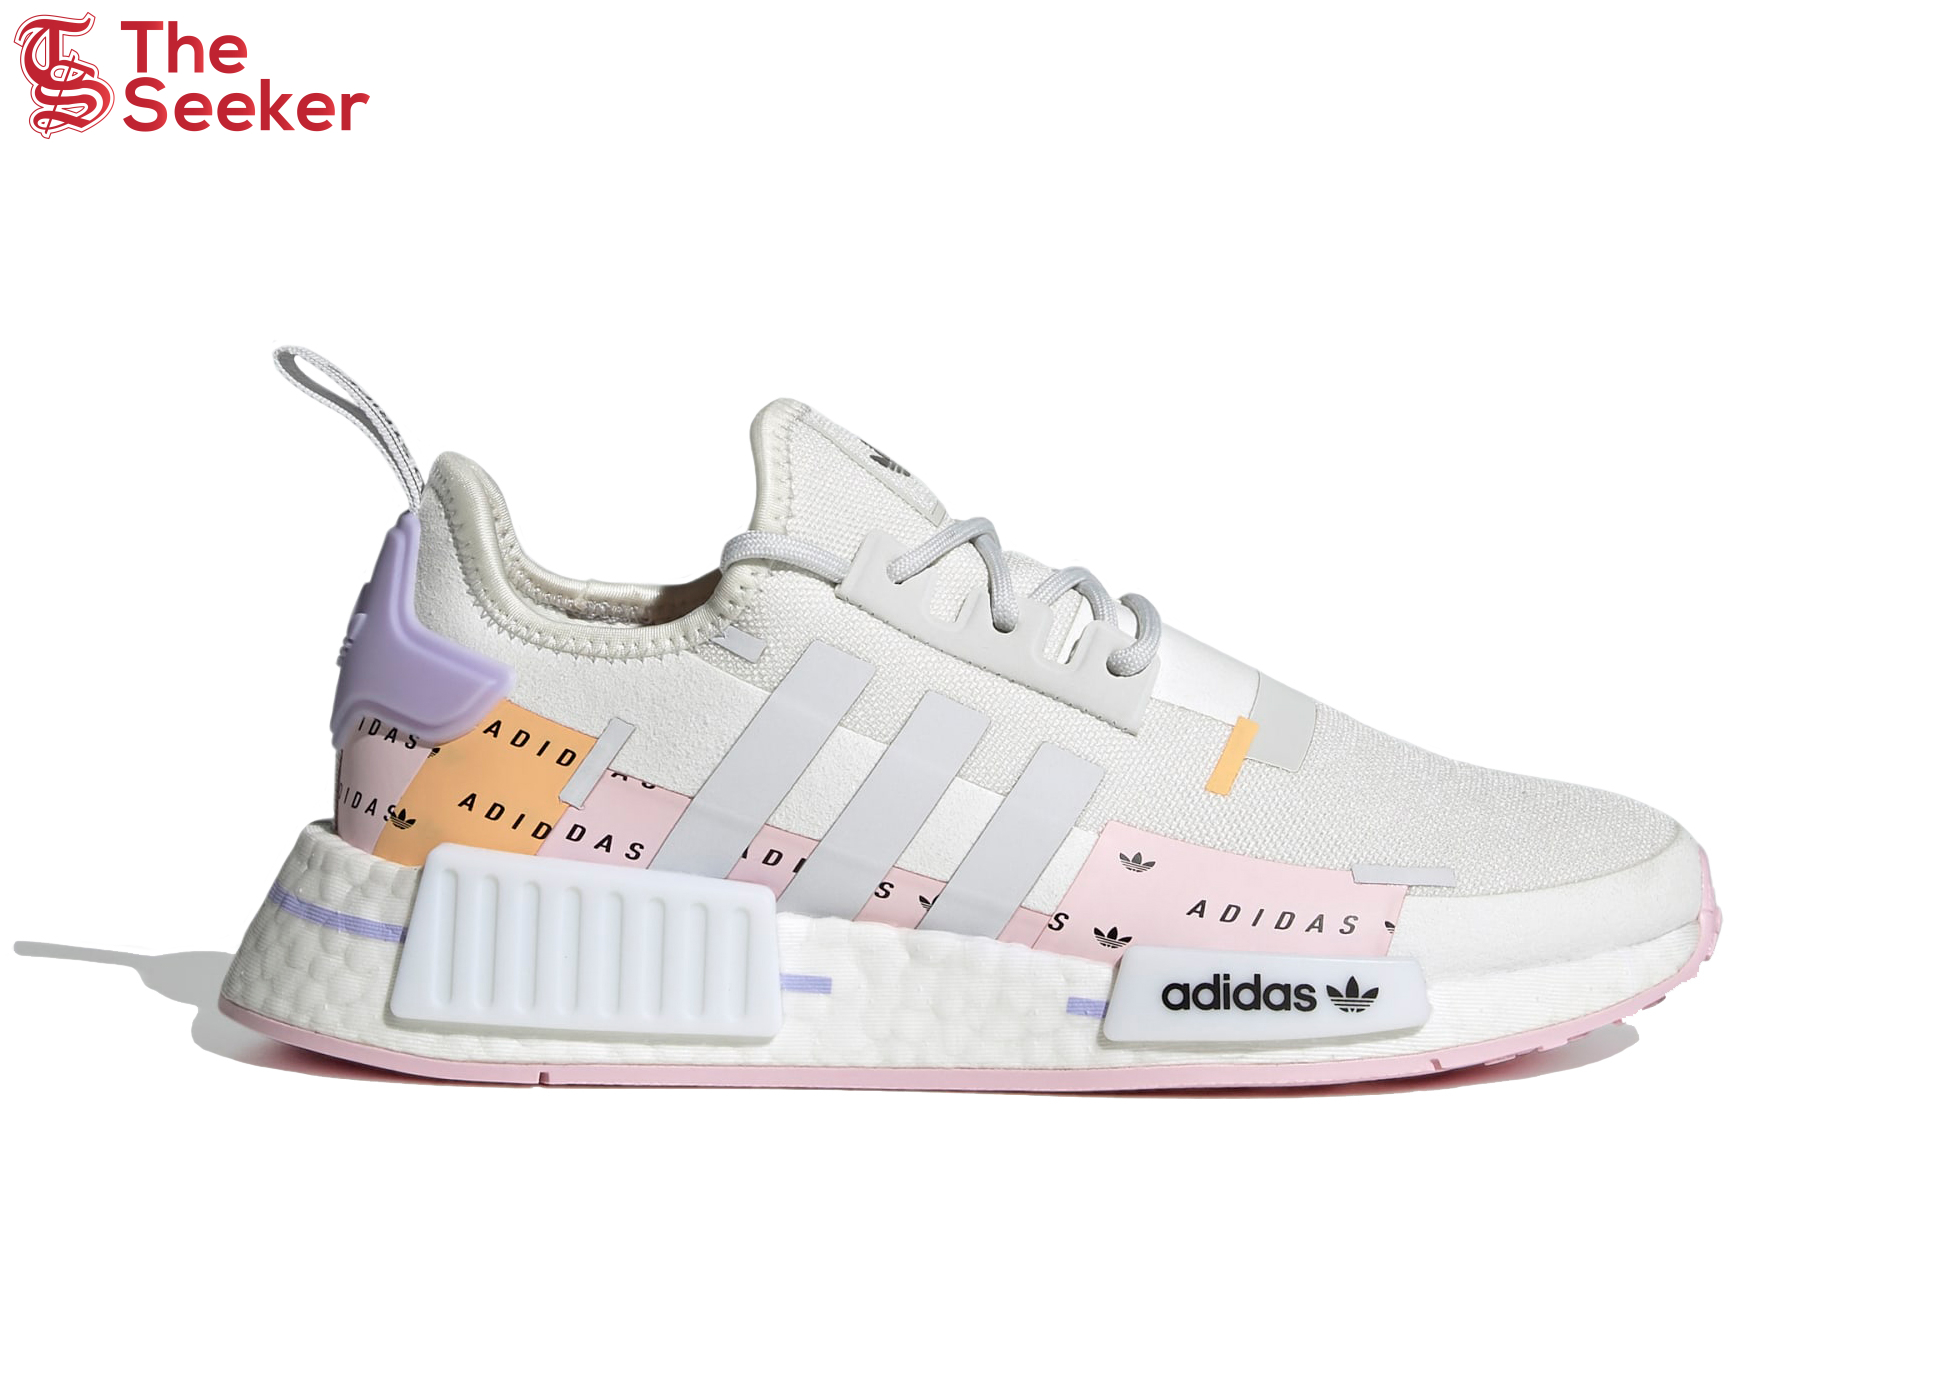 adidas NMD R1 Crystal White Clear Pink (Women's)